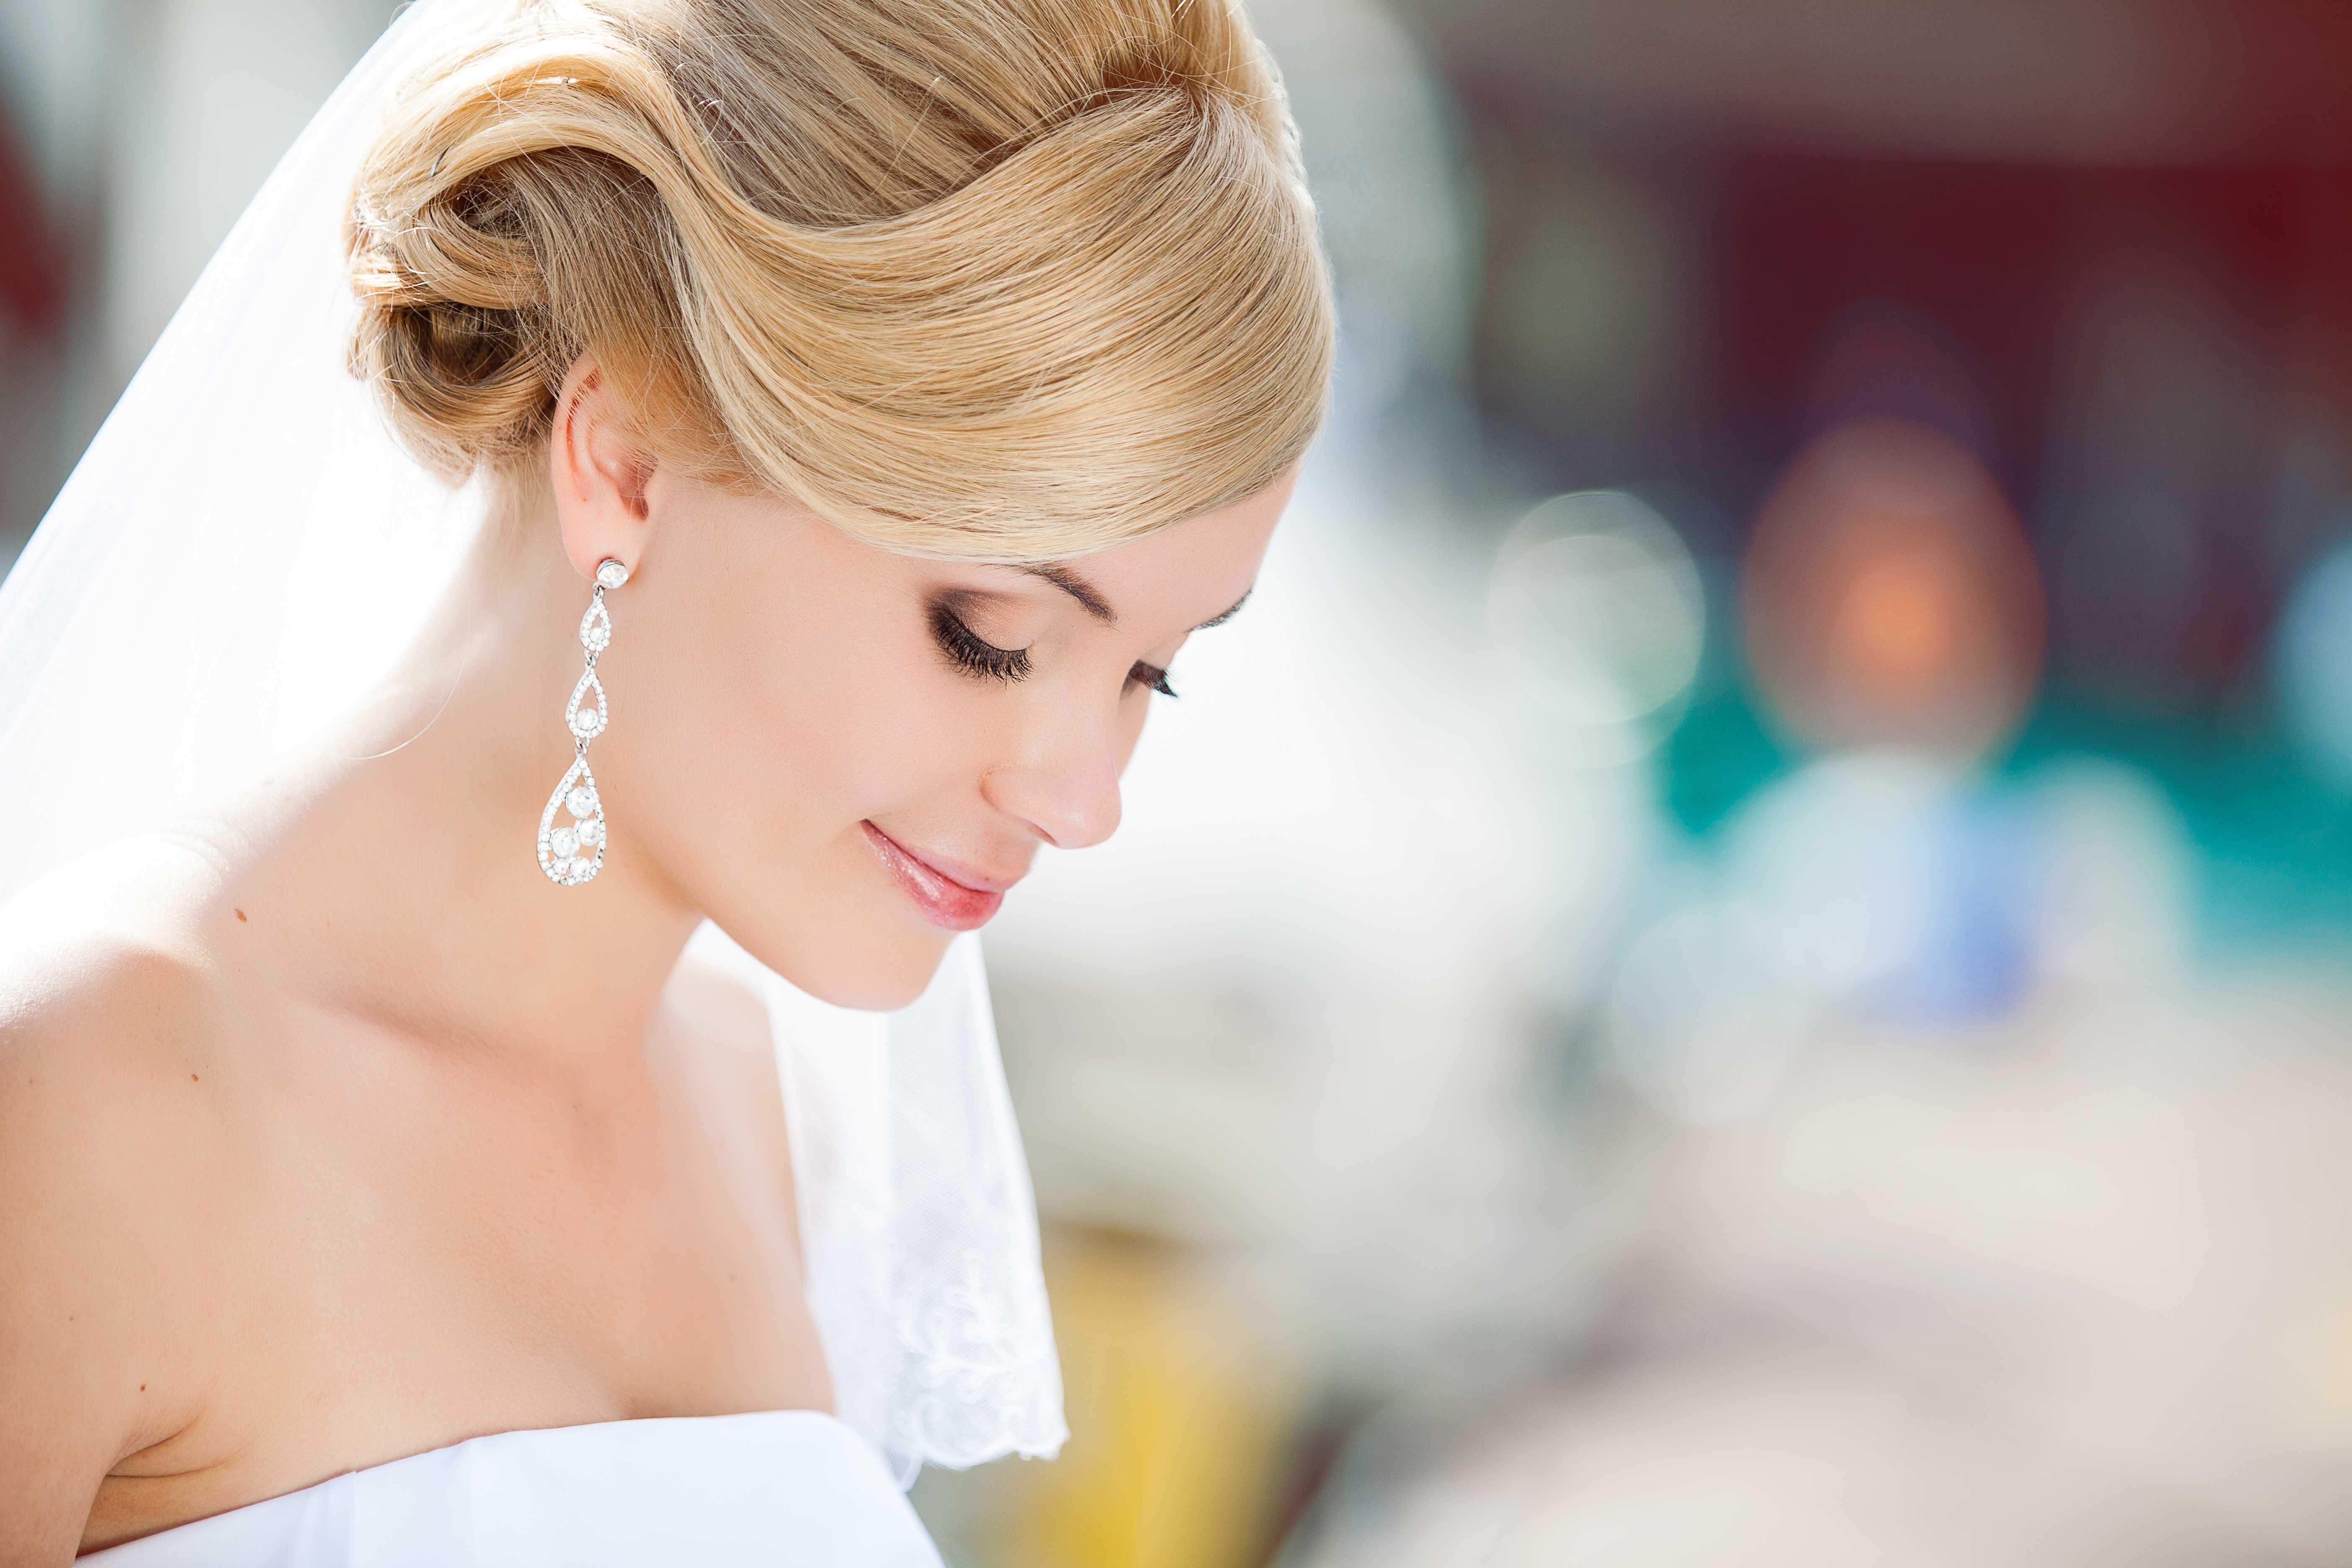 4 Ways to Look Your Best on Your Wedding Day